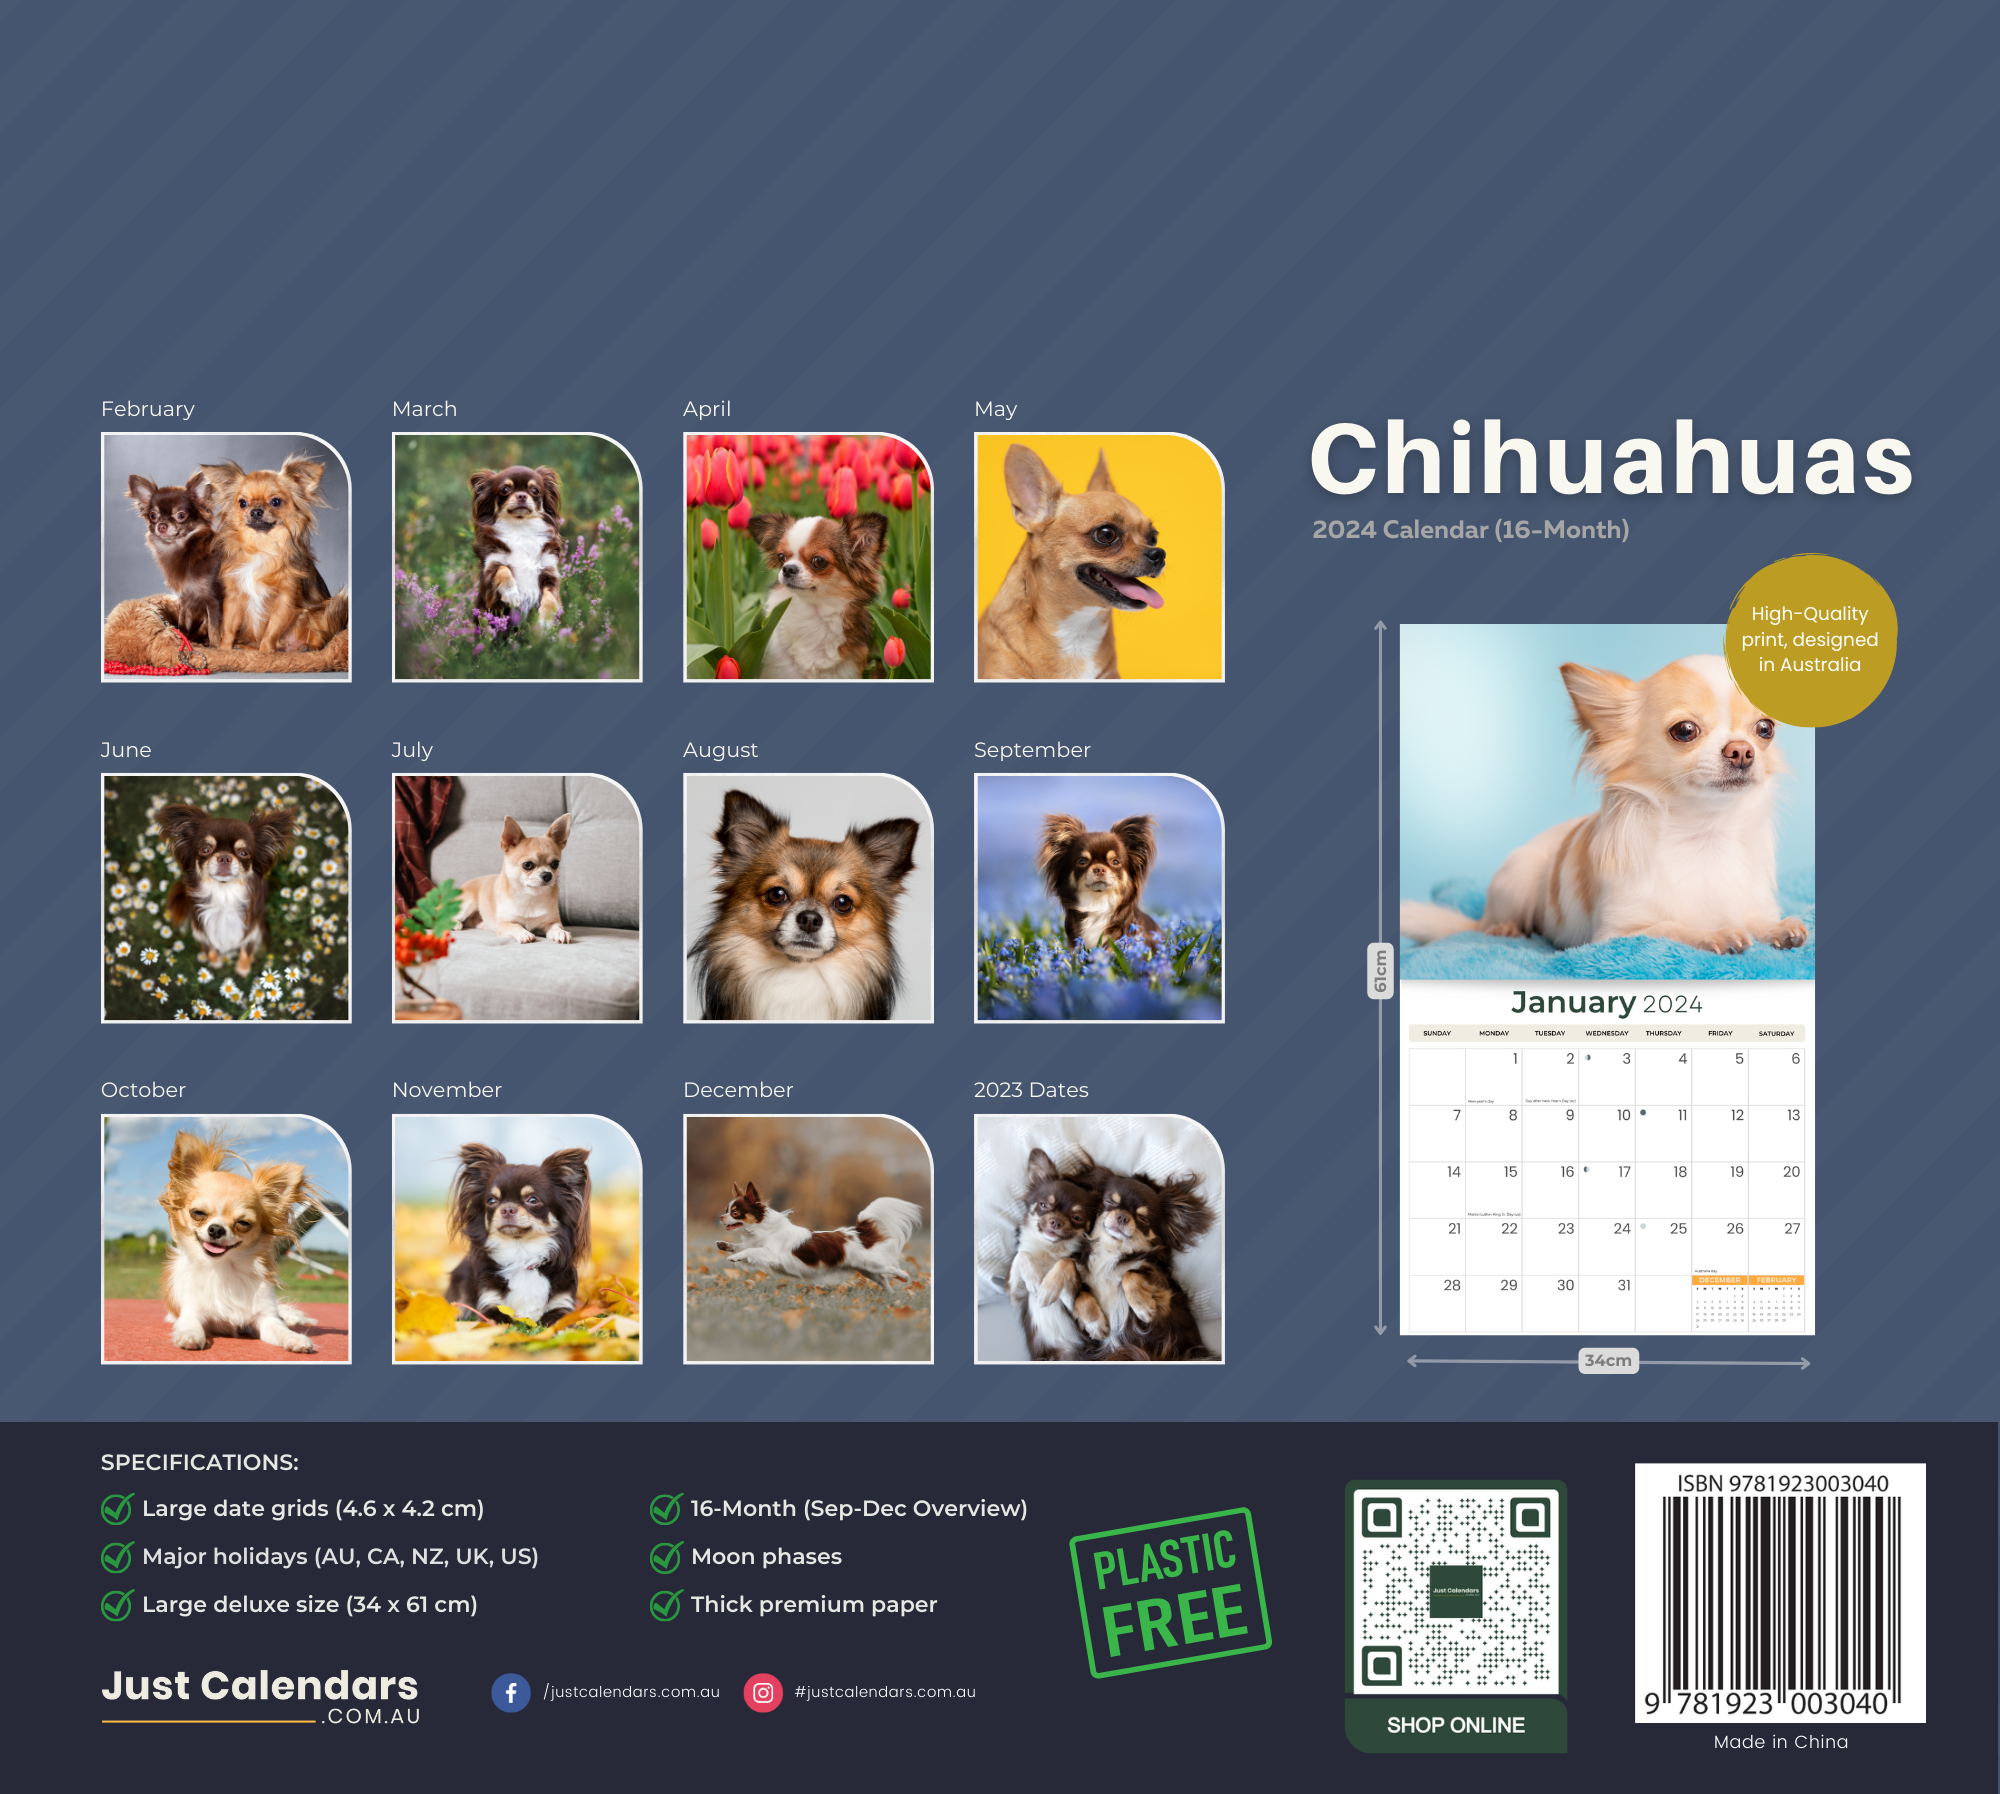 2024 Chihuahuas Dogs & Puppies - Deluxe Wall Calendar by Just Calendars - 16 Month - Plastic Free